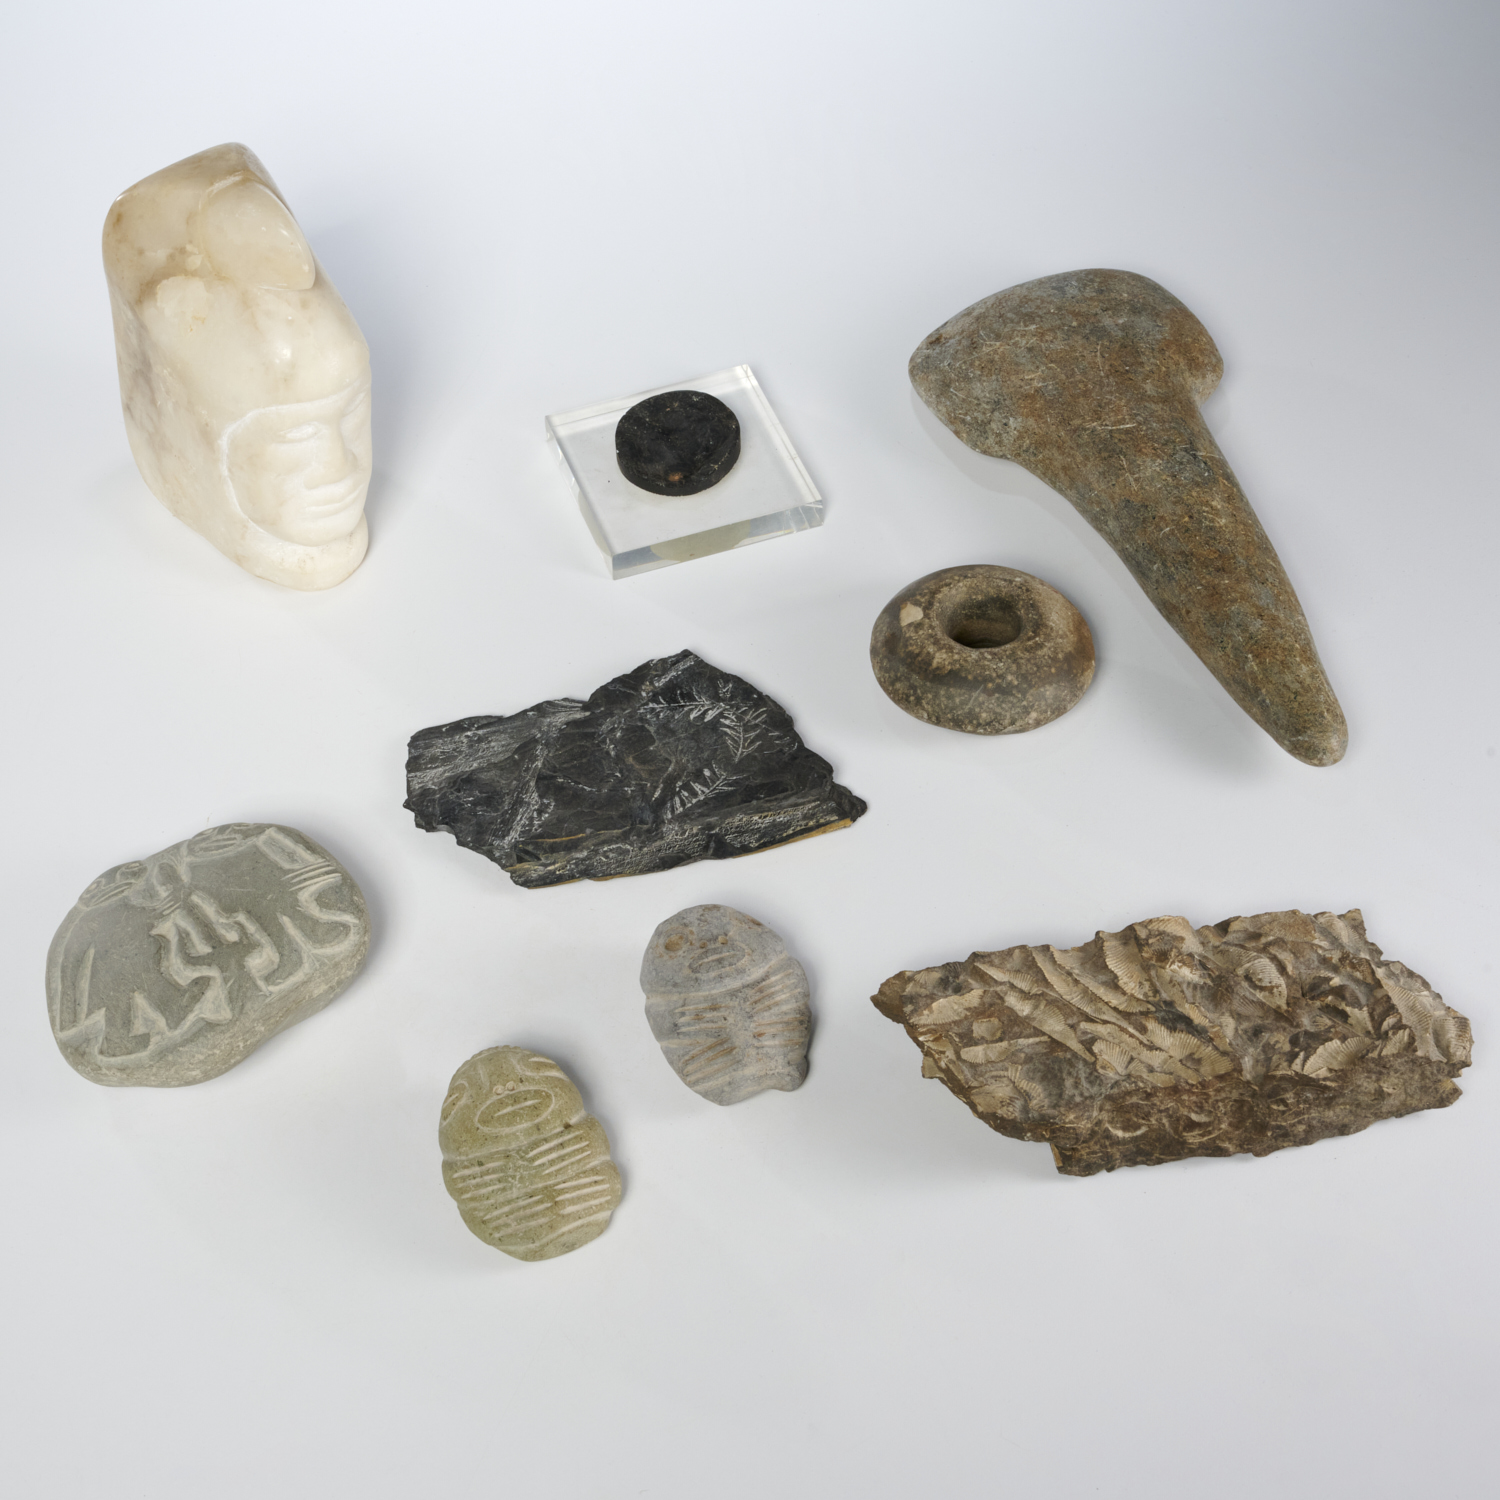 GROUP (9) CARVED STONE OBJECTS